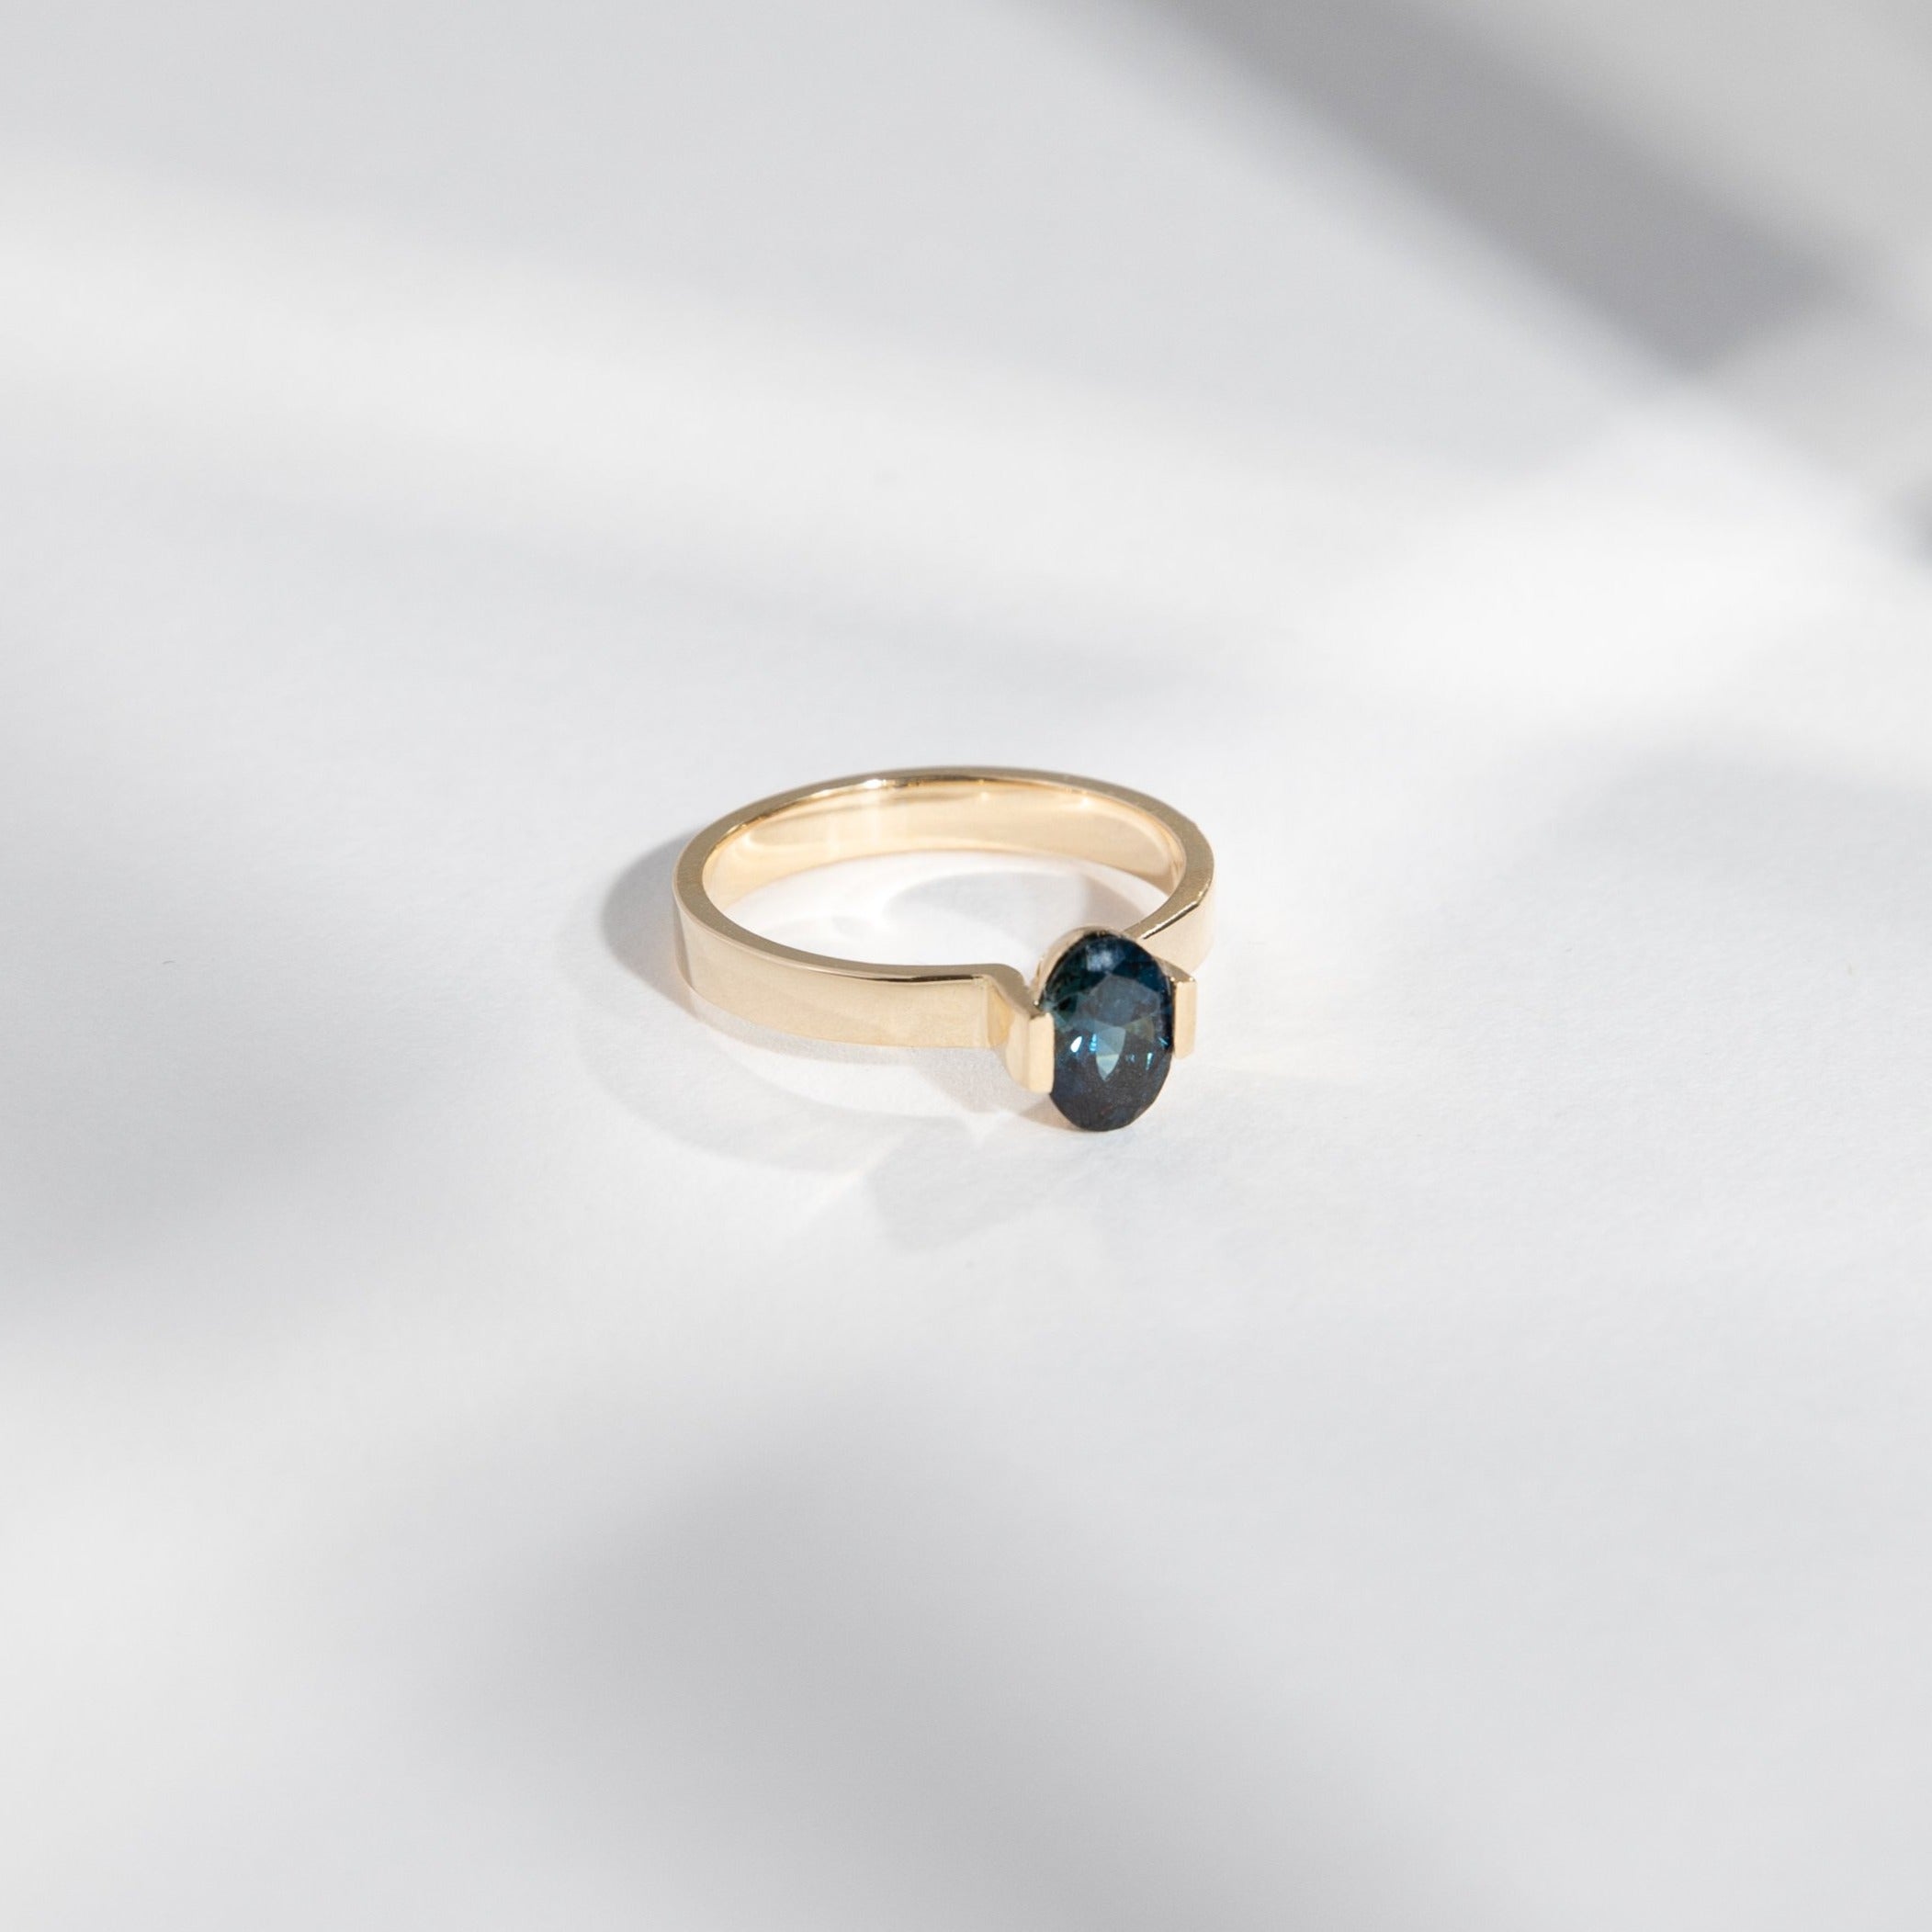 Silva Alternative Ring in 14k Gold set with a 1ct oval cut sapphire By SHW Fine Jewelry NYC